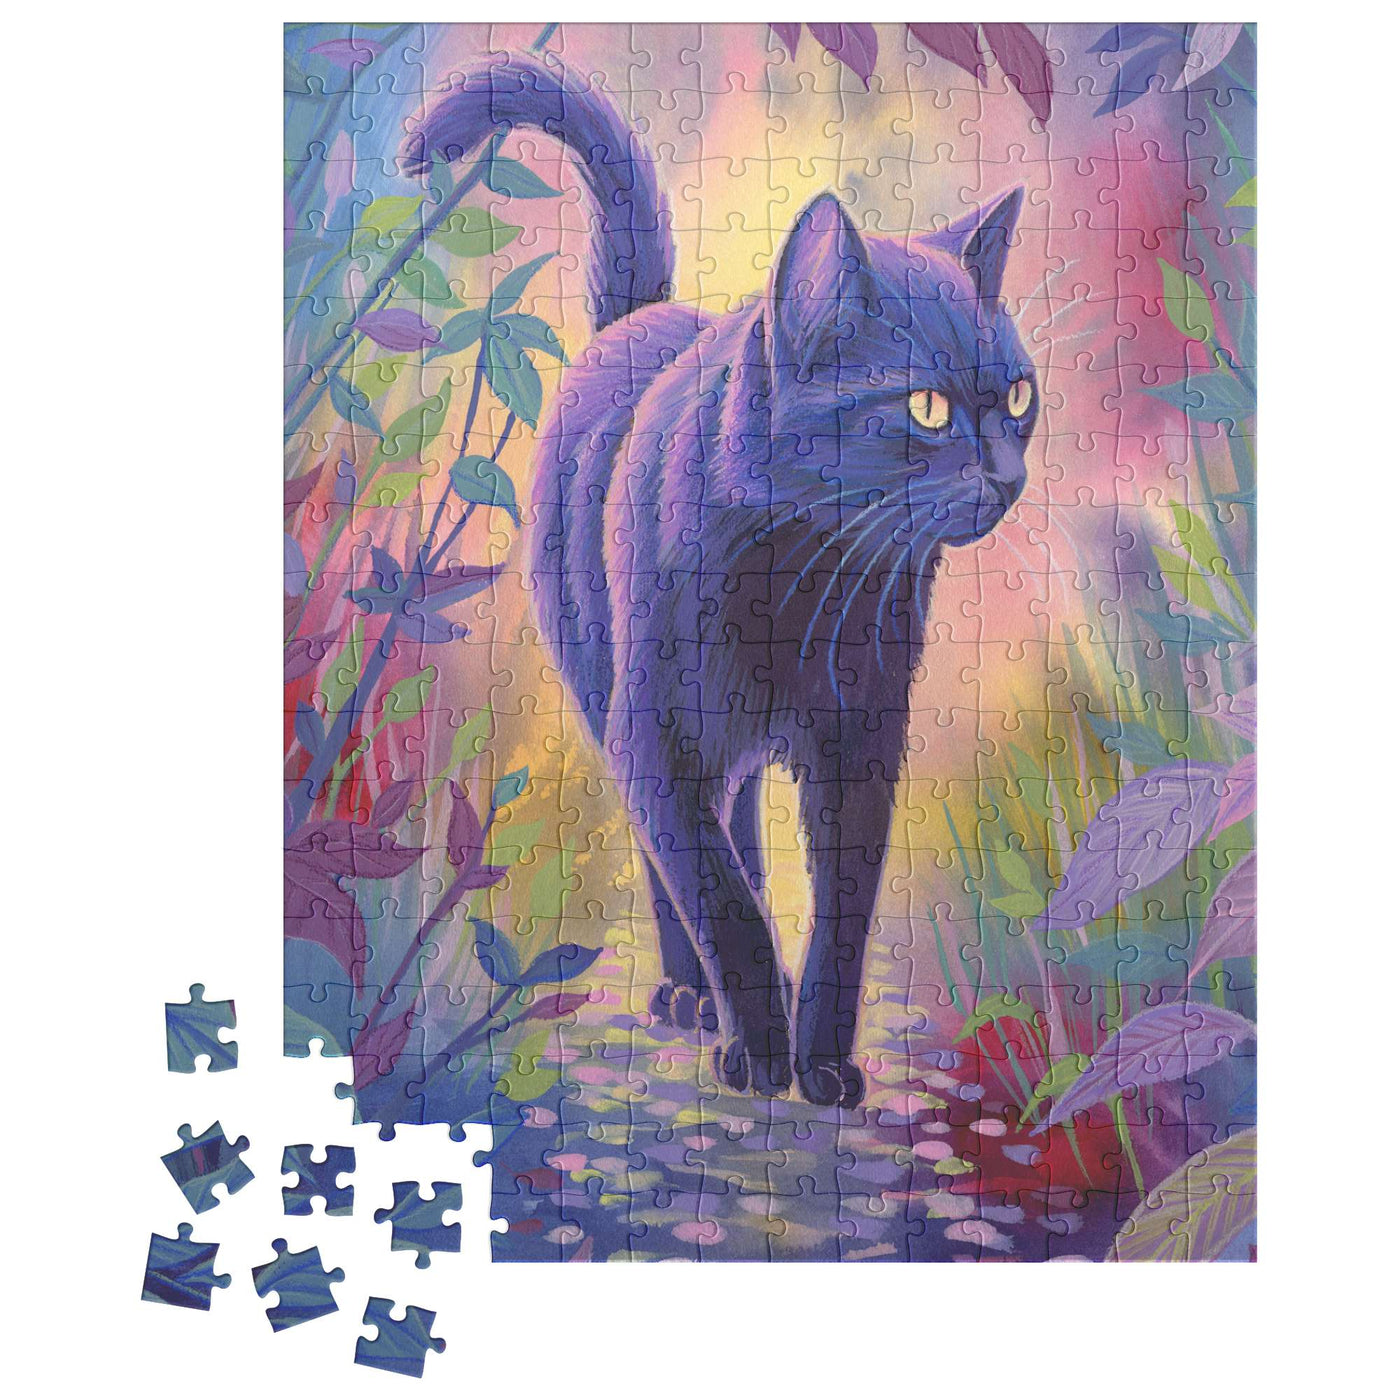 A Cat Puzzle depicting a black cat walking on a stone path surrounded by plants, with some pieces detached at the bottom left corner.